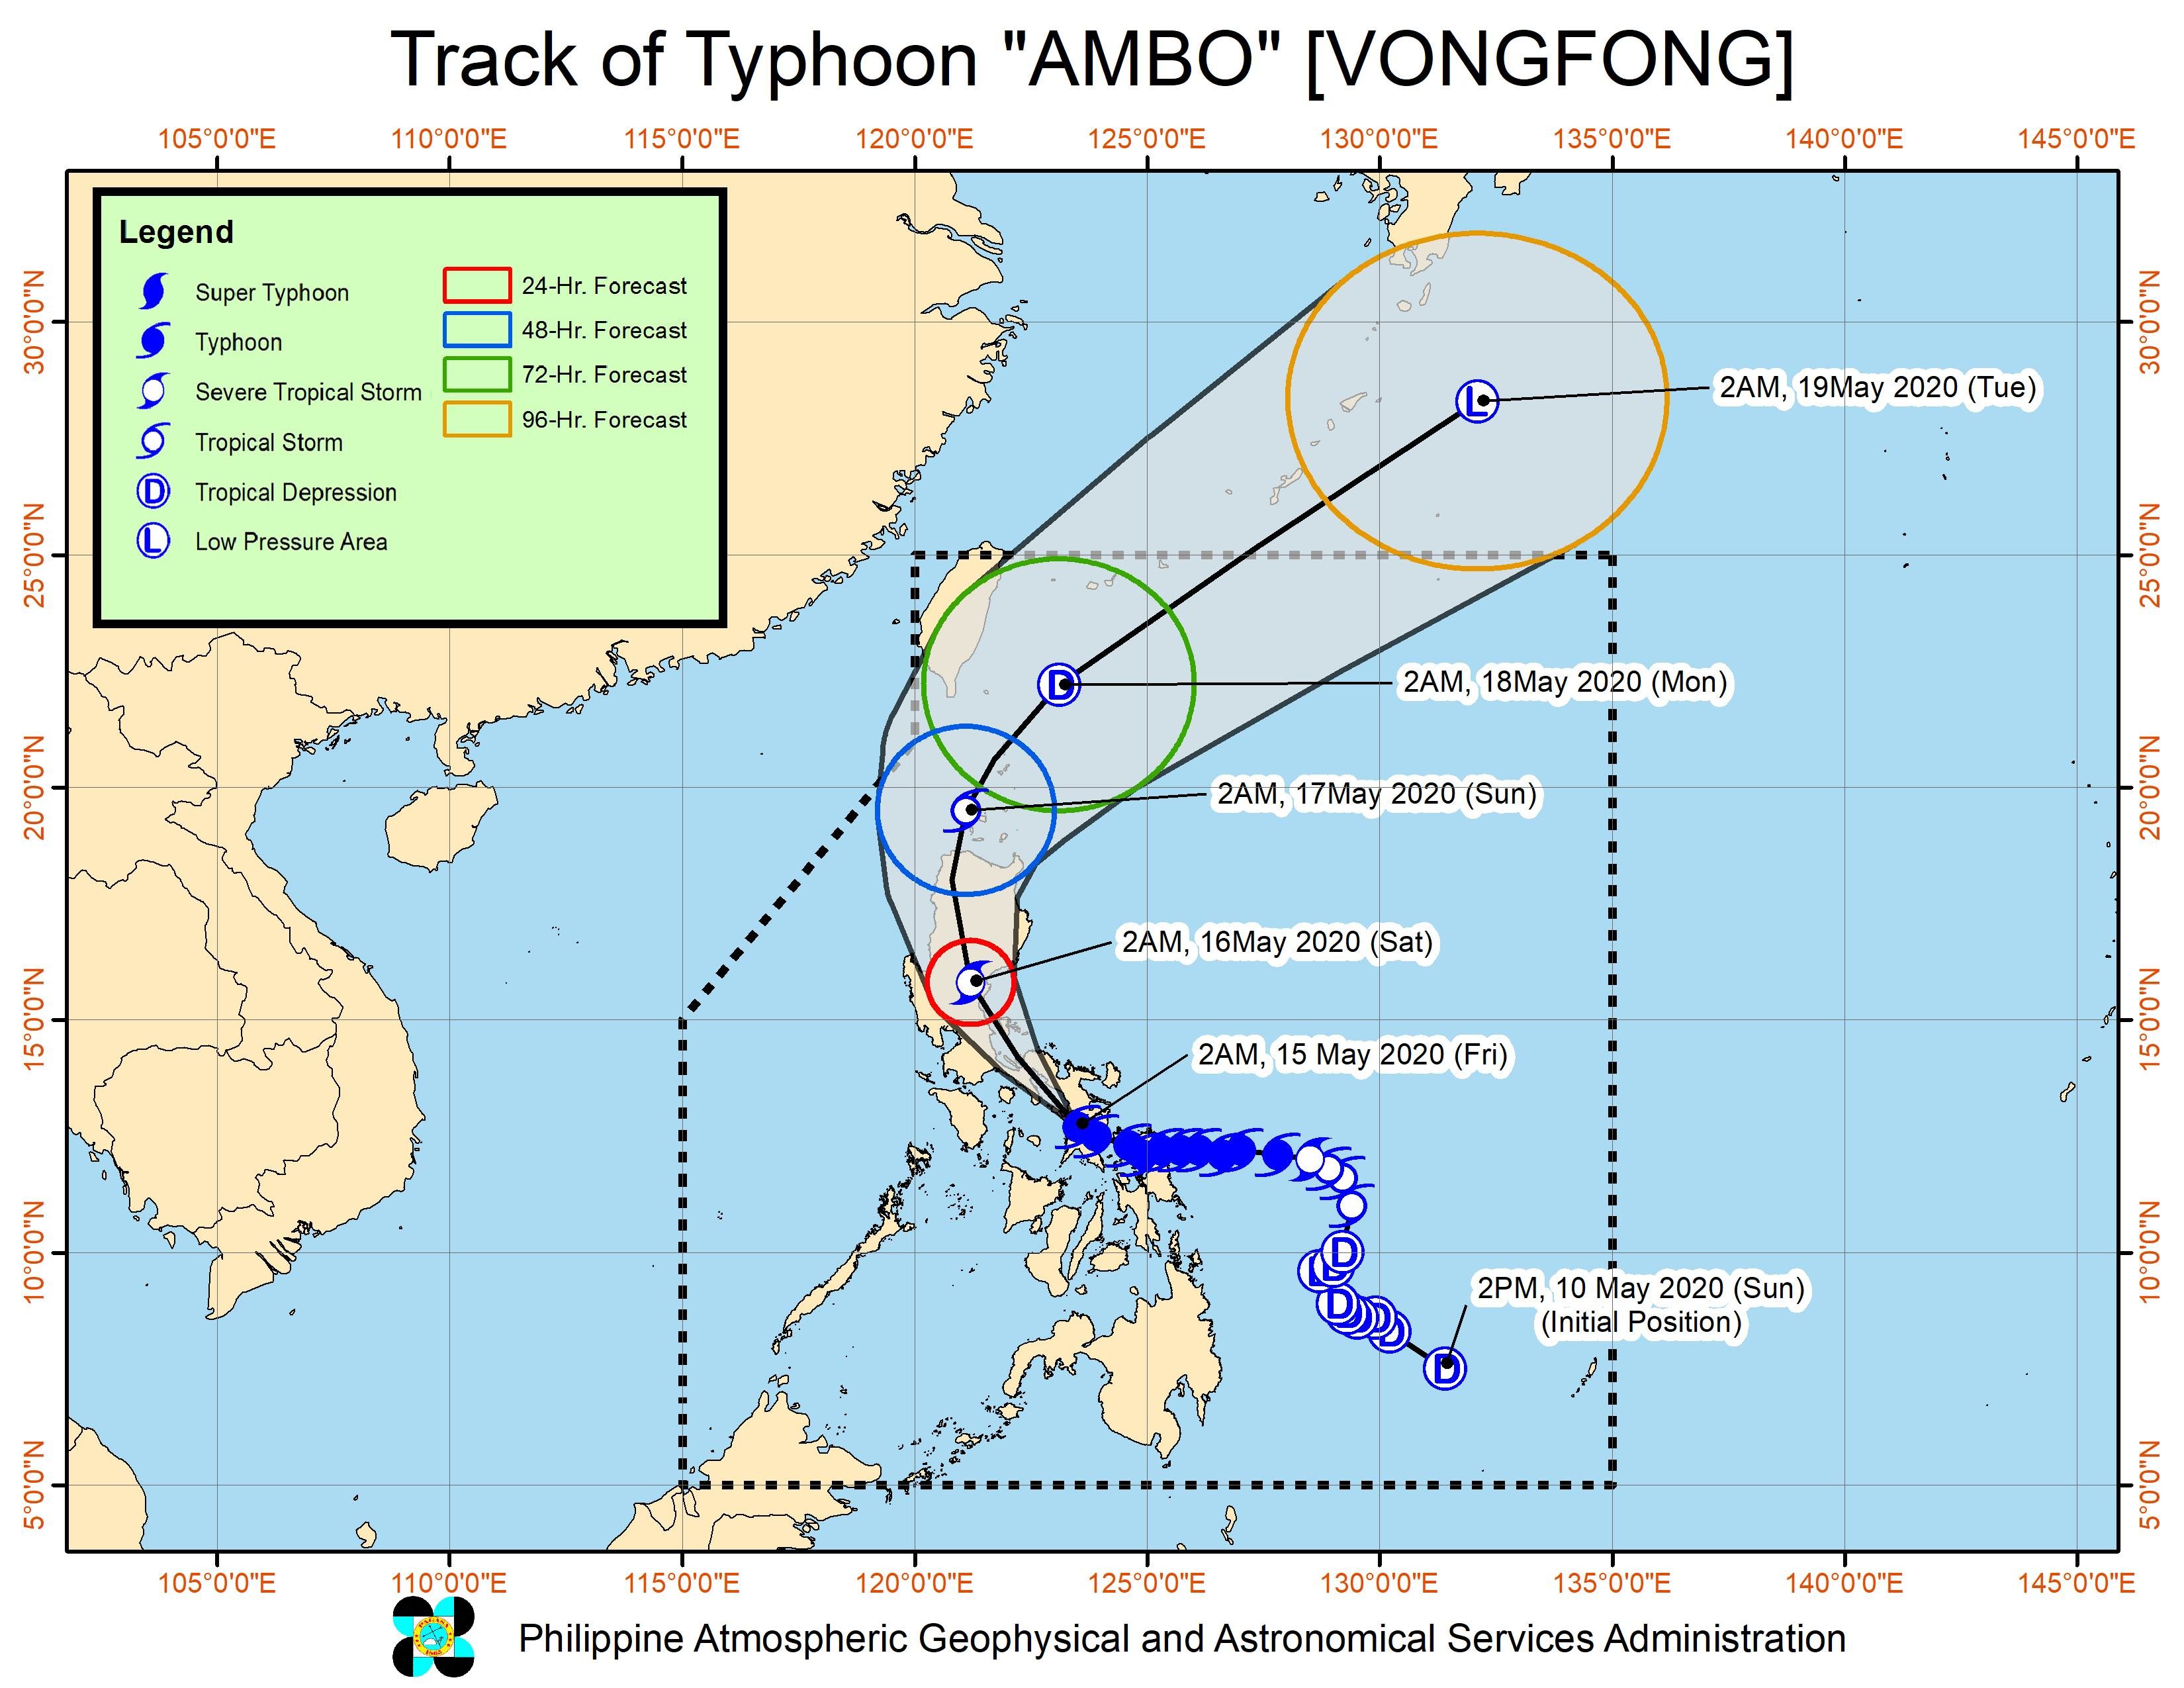 Forecast track of Typhoon Ambo (Vongfong) as of May 15, 2020, 5 am. Image from PAGASA 